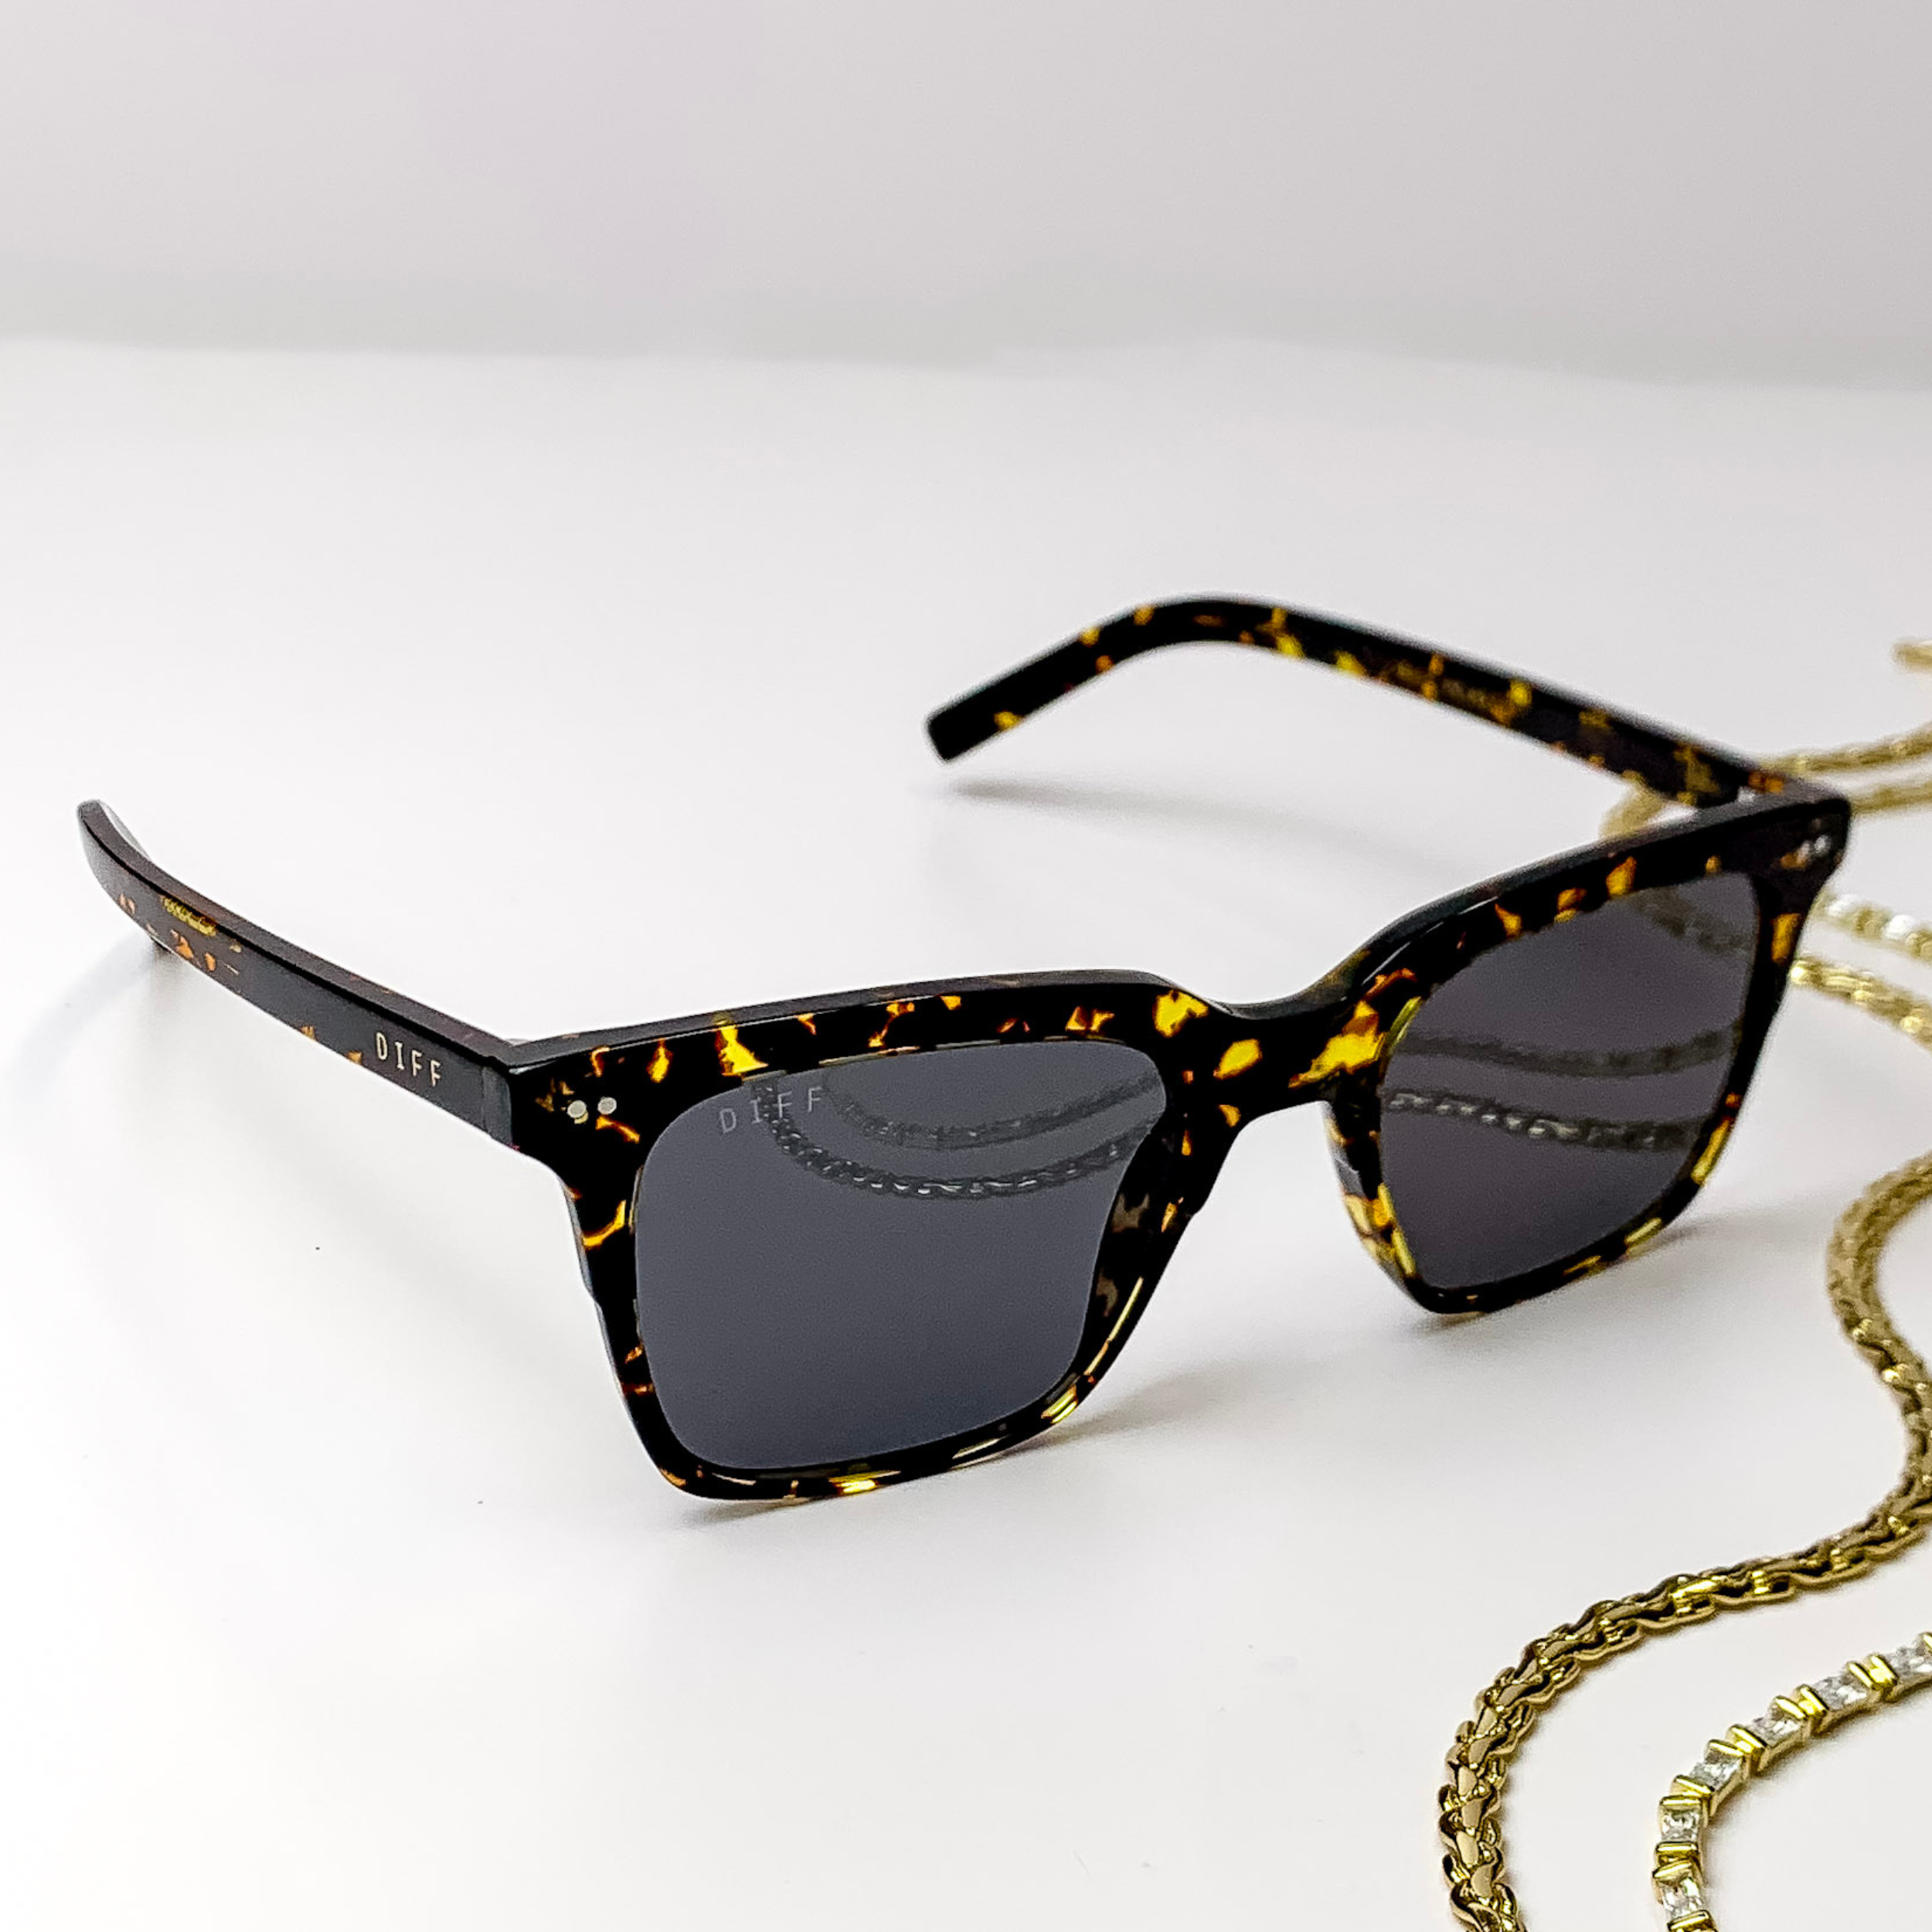 Square black sunglasses with a thick frame, golden yellow spots throughout, and grey lenses